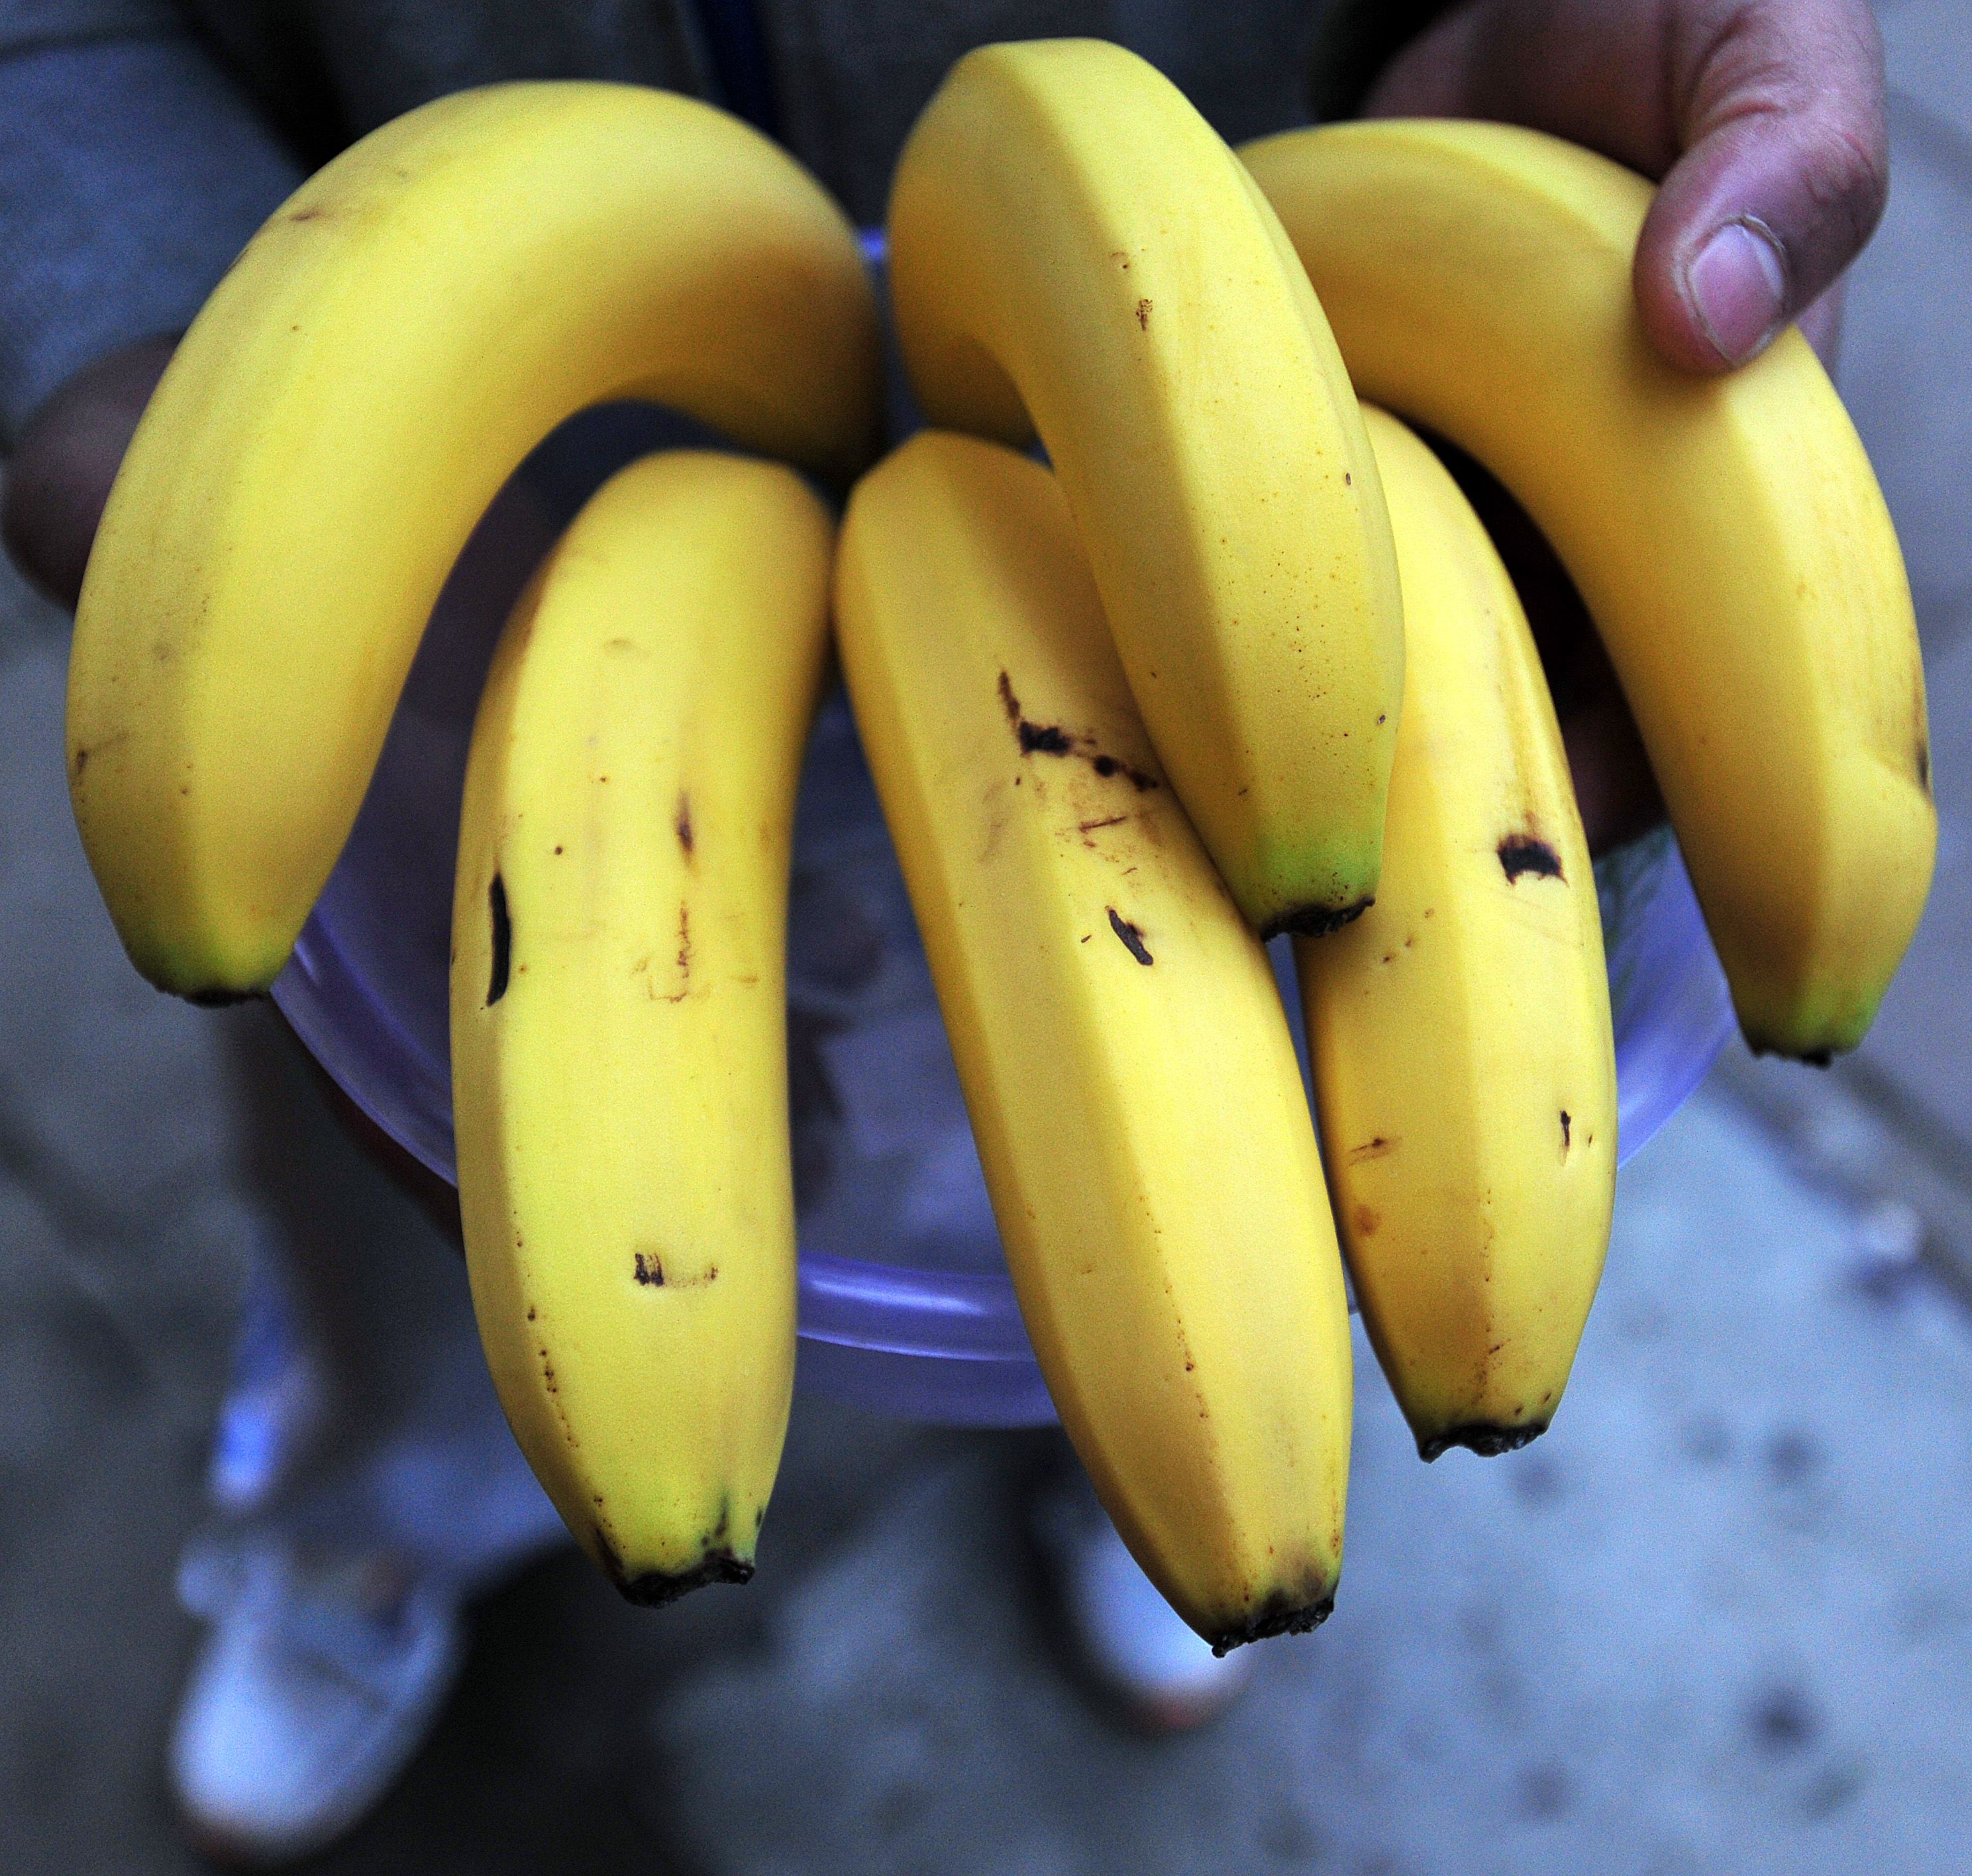 Apparently This Matters: Banana peels